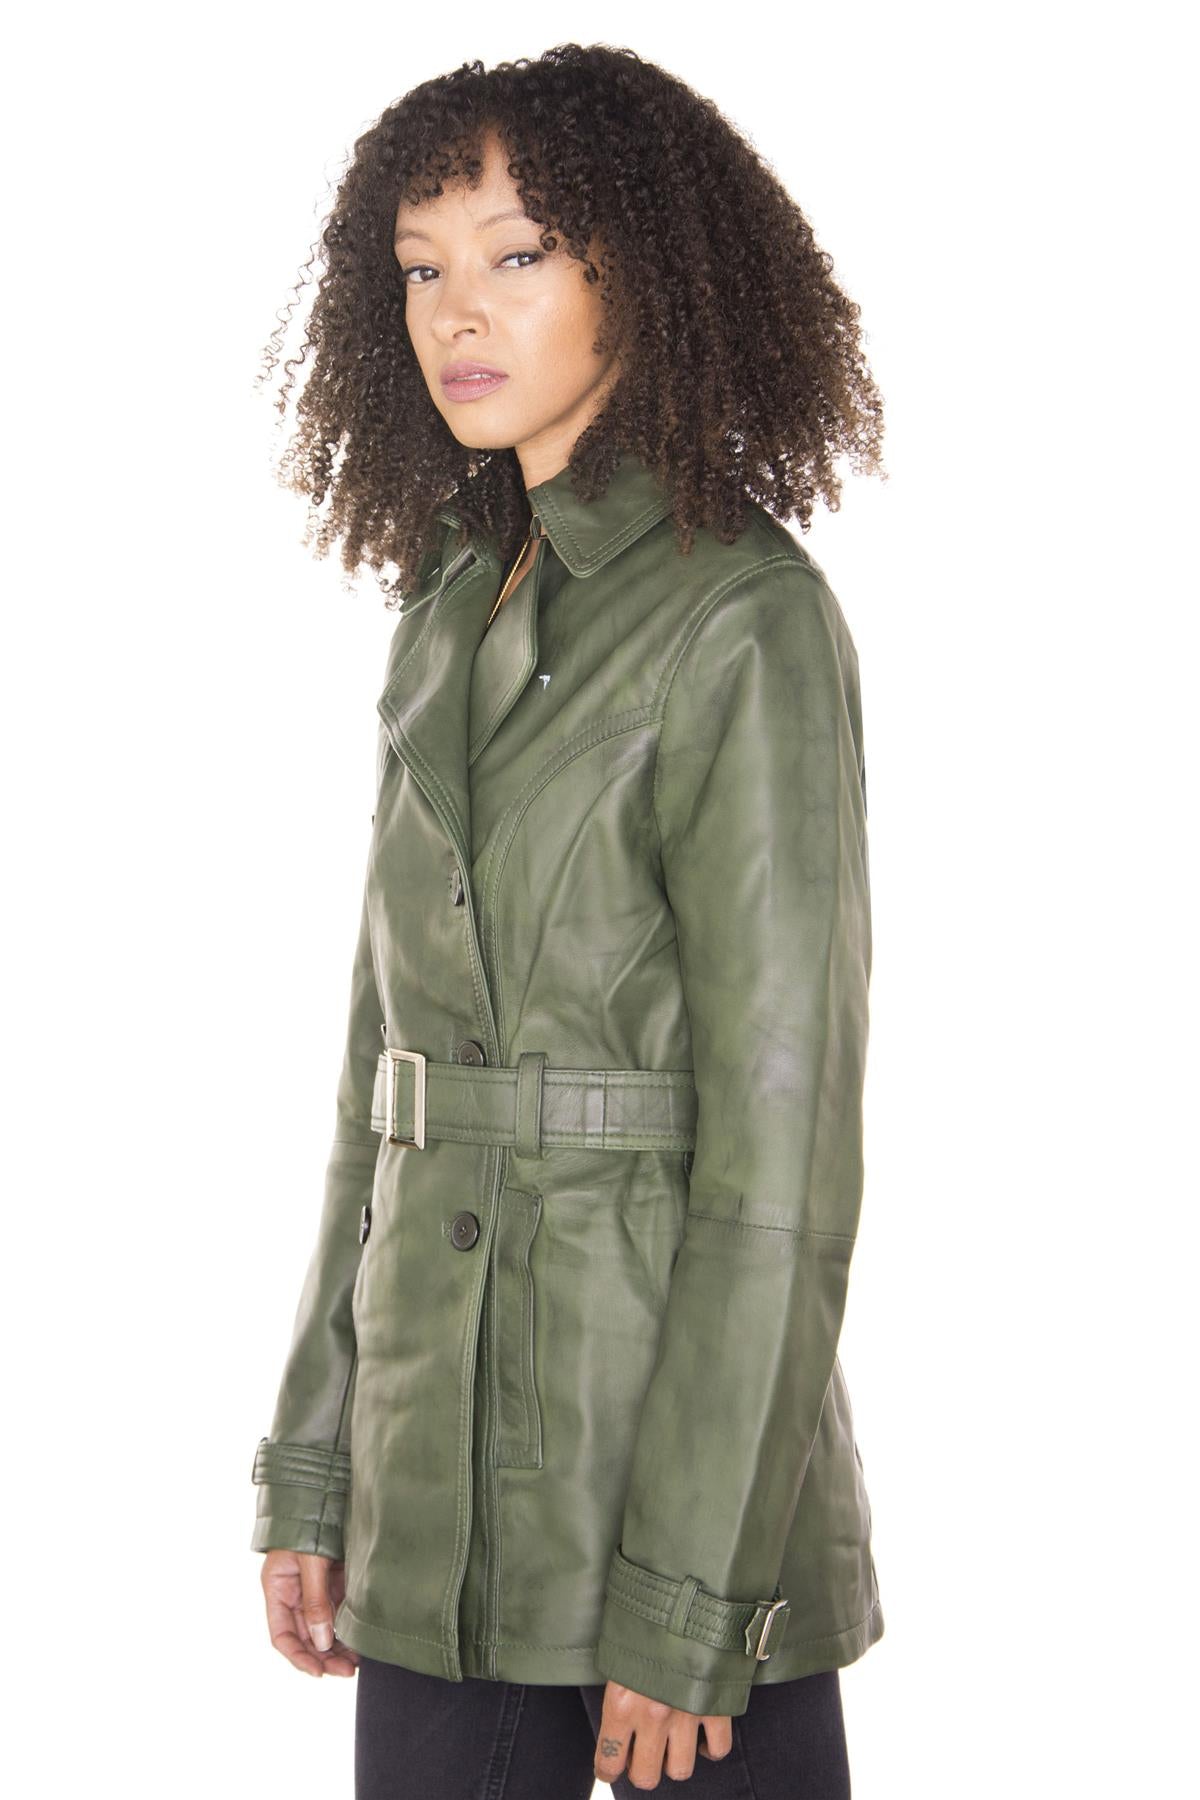 Womens Nappa Leather Trench Coat-Mosul